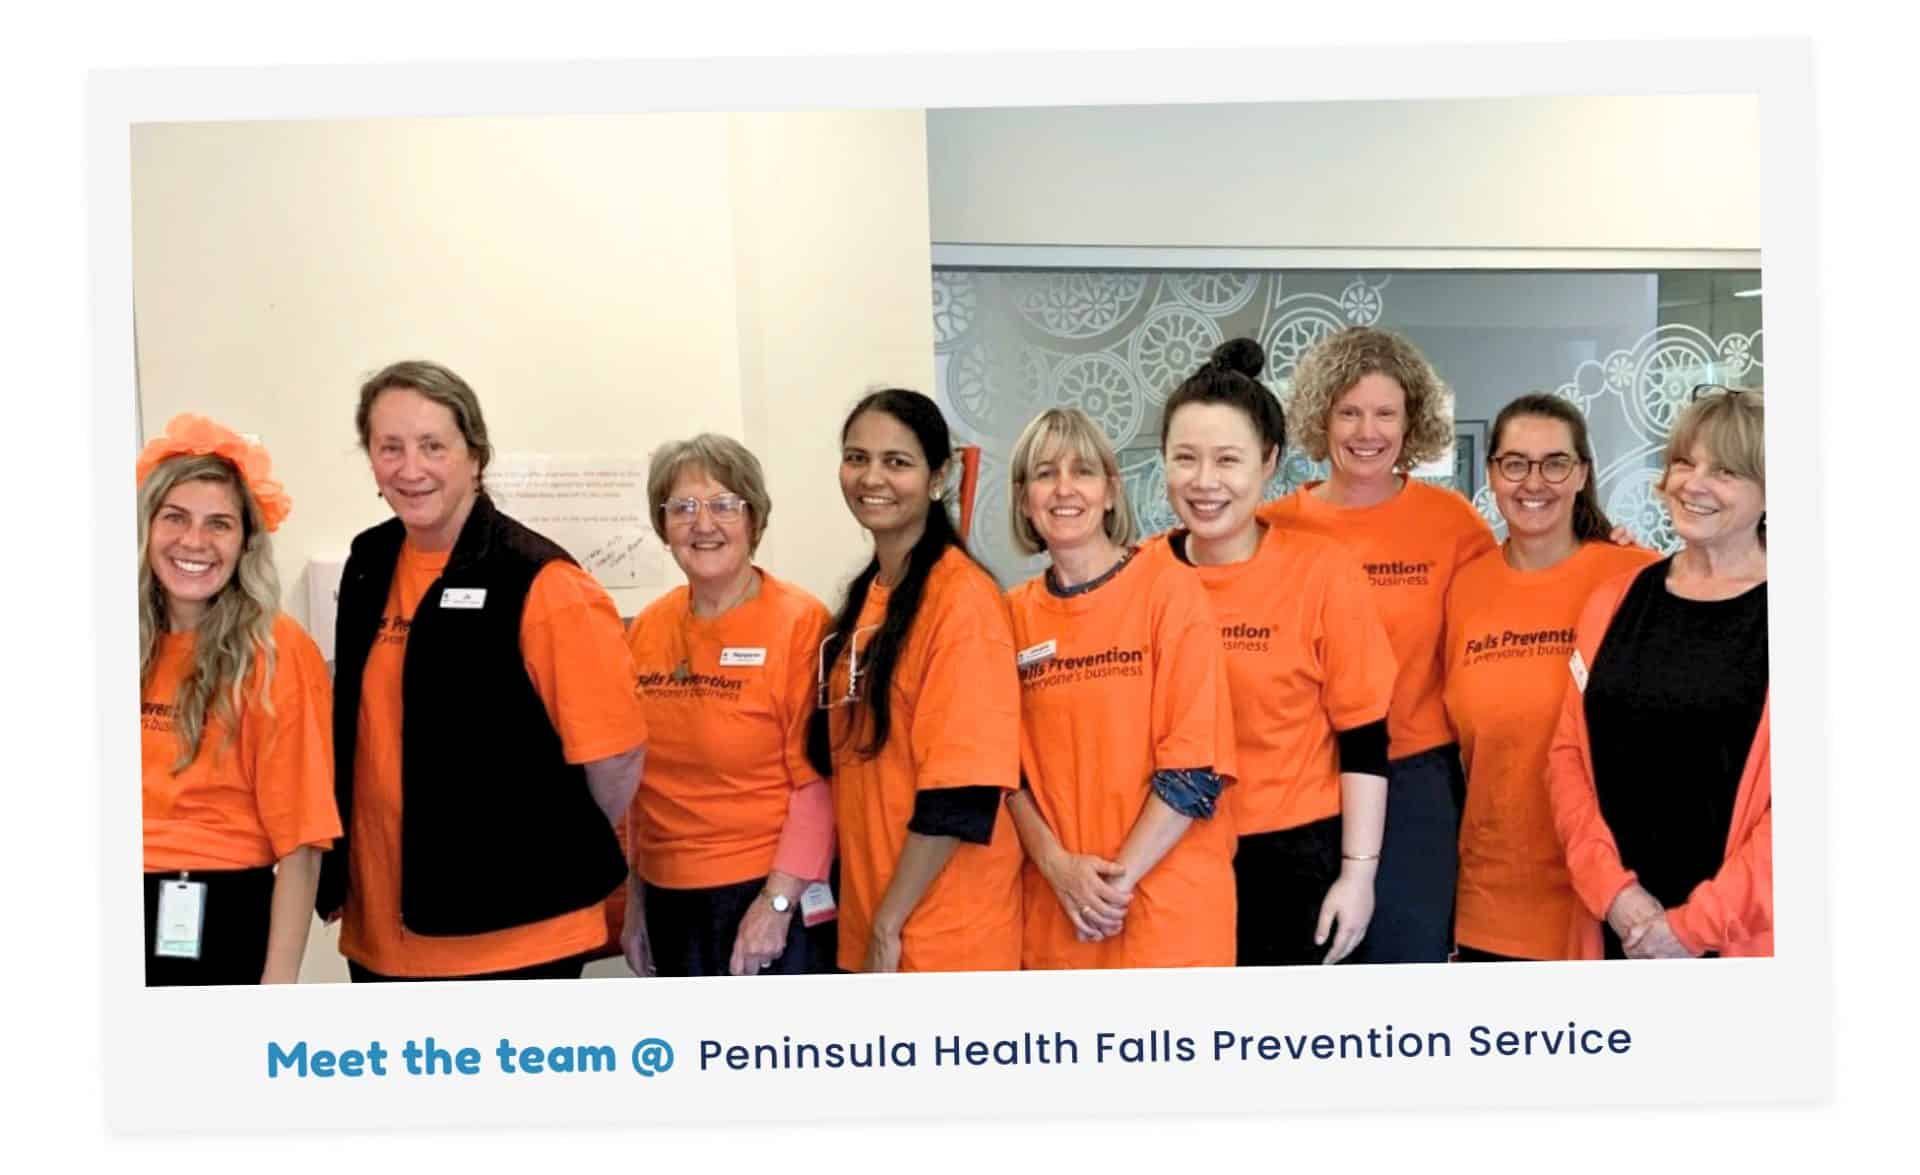 The team at the Peninsula Health Falls Prevention Service